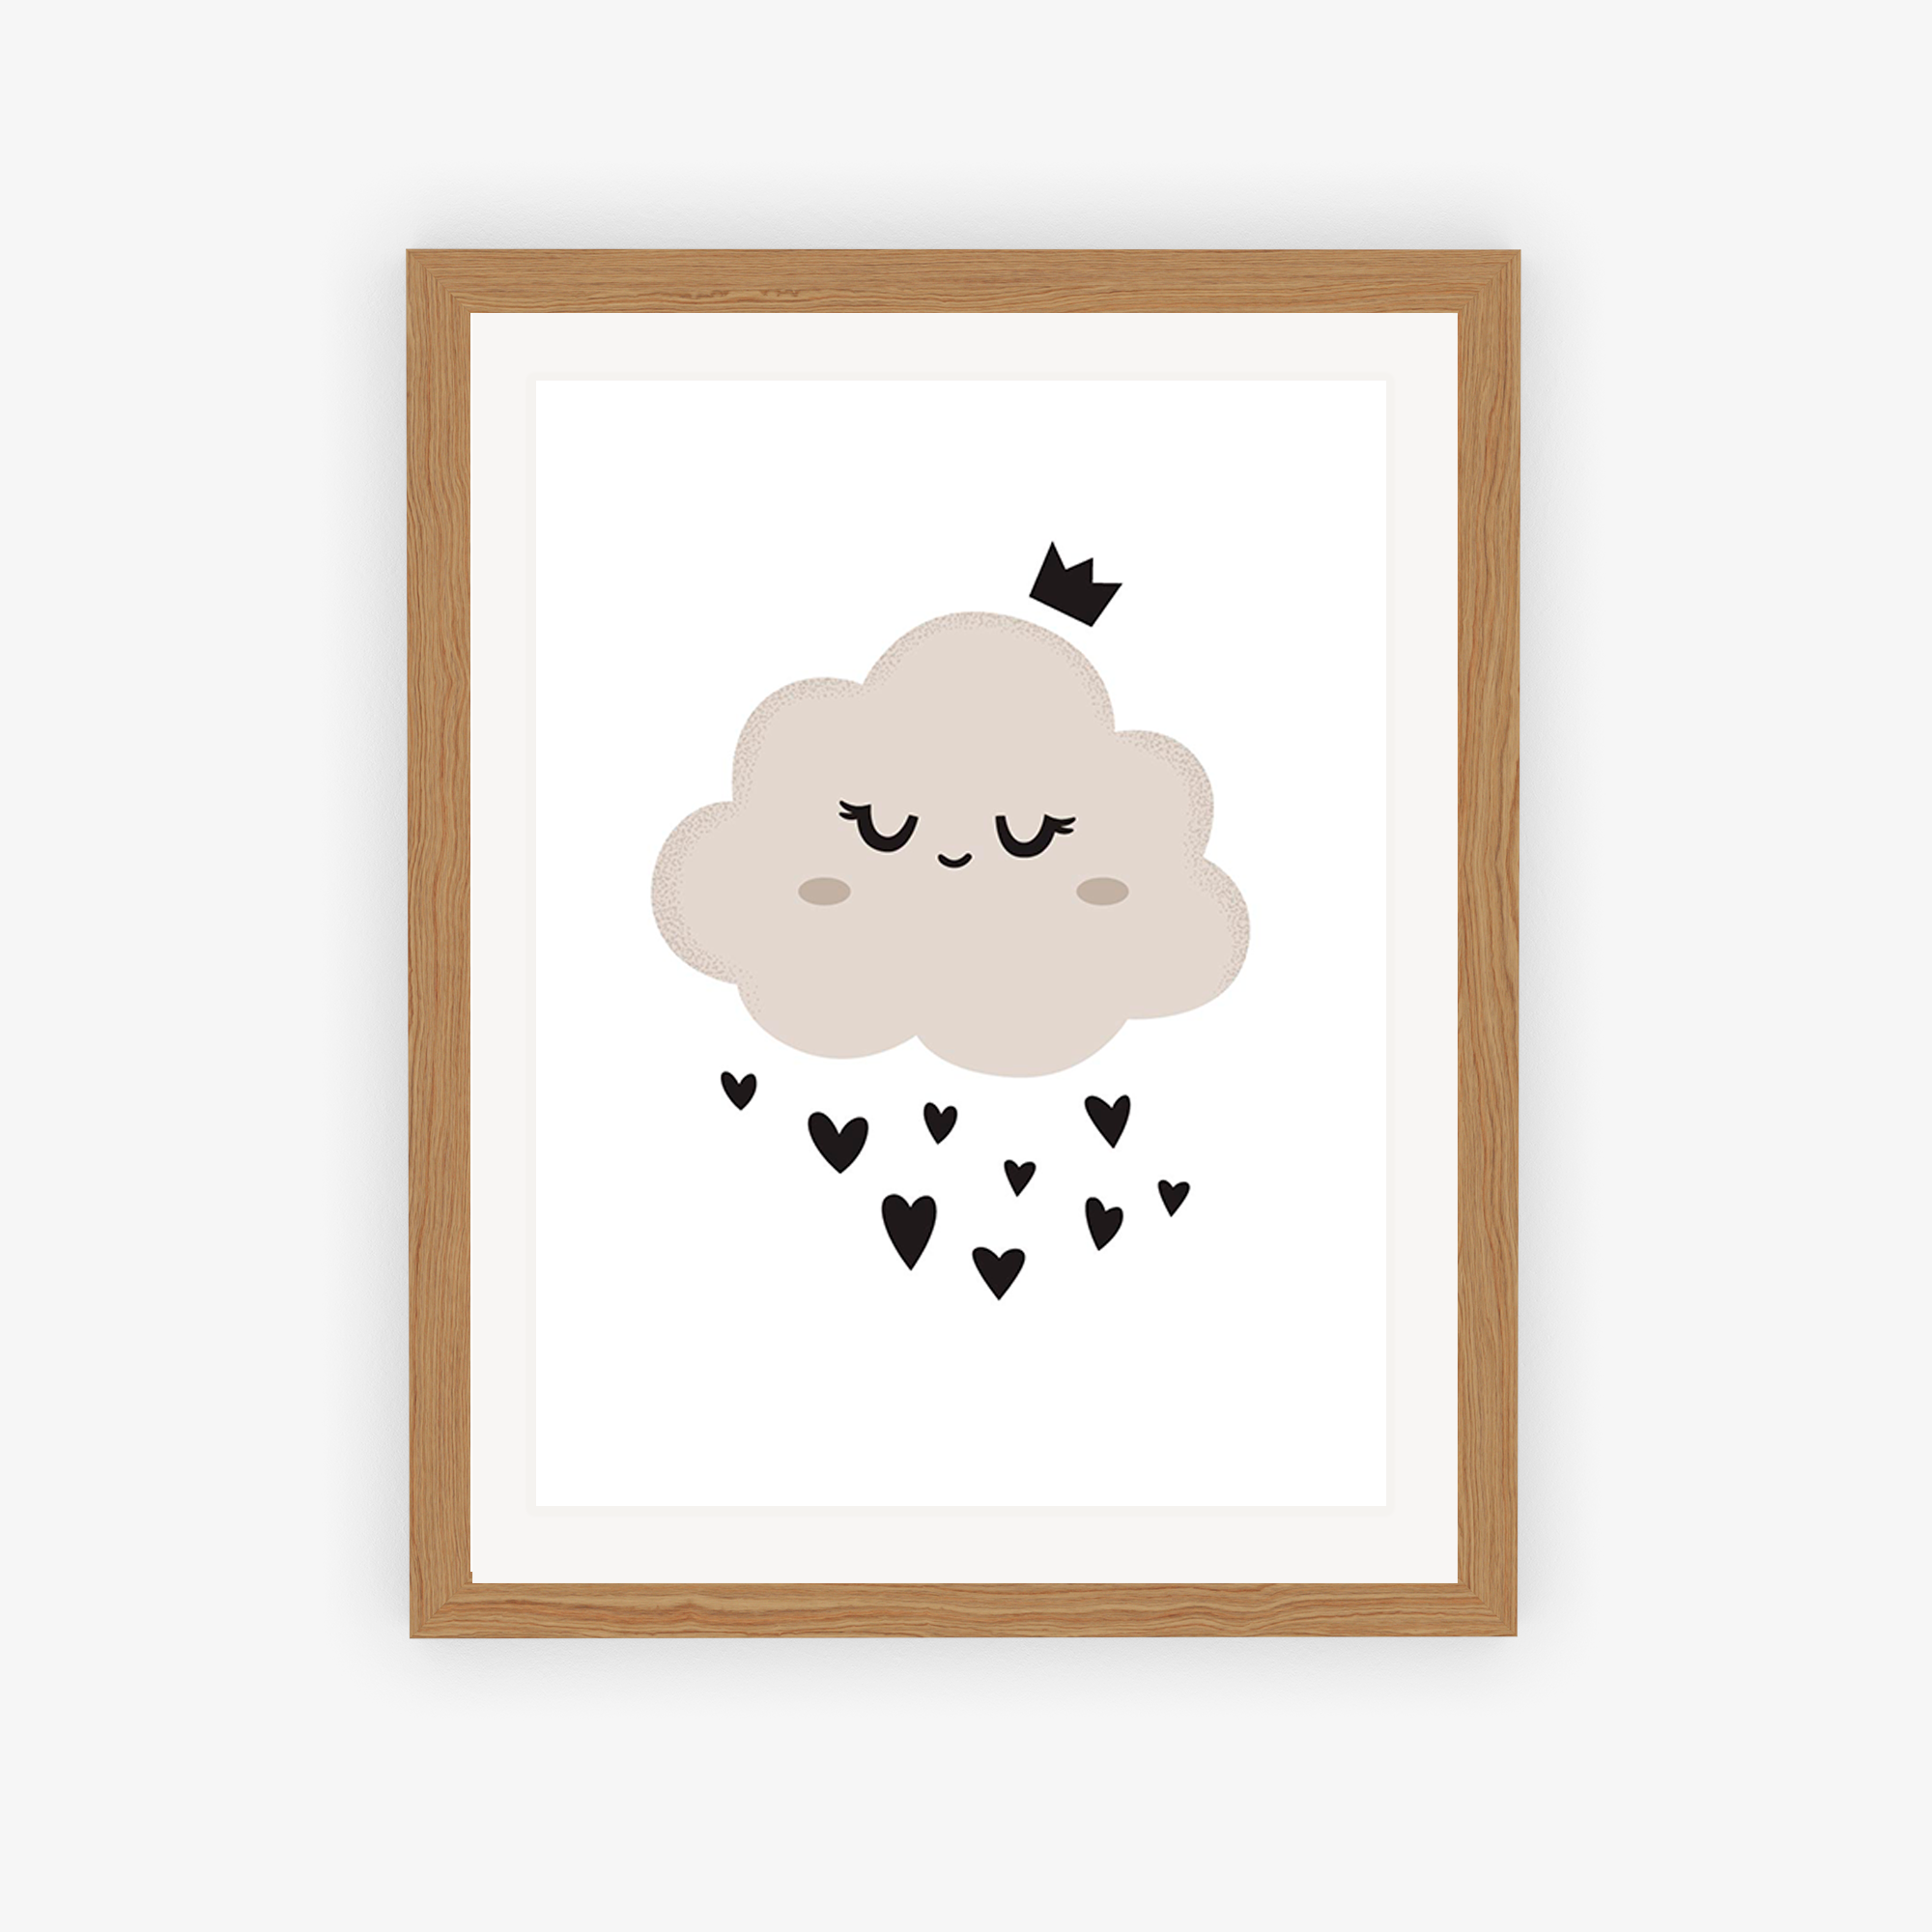 Cloudy Love Showers Poster